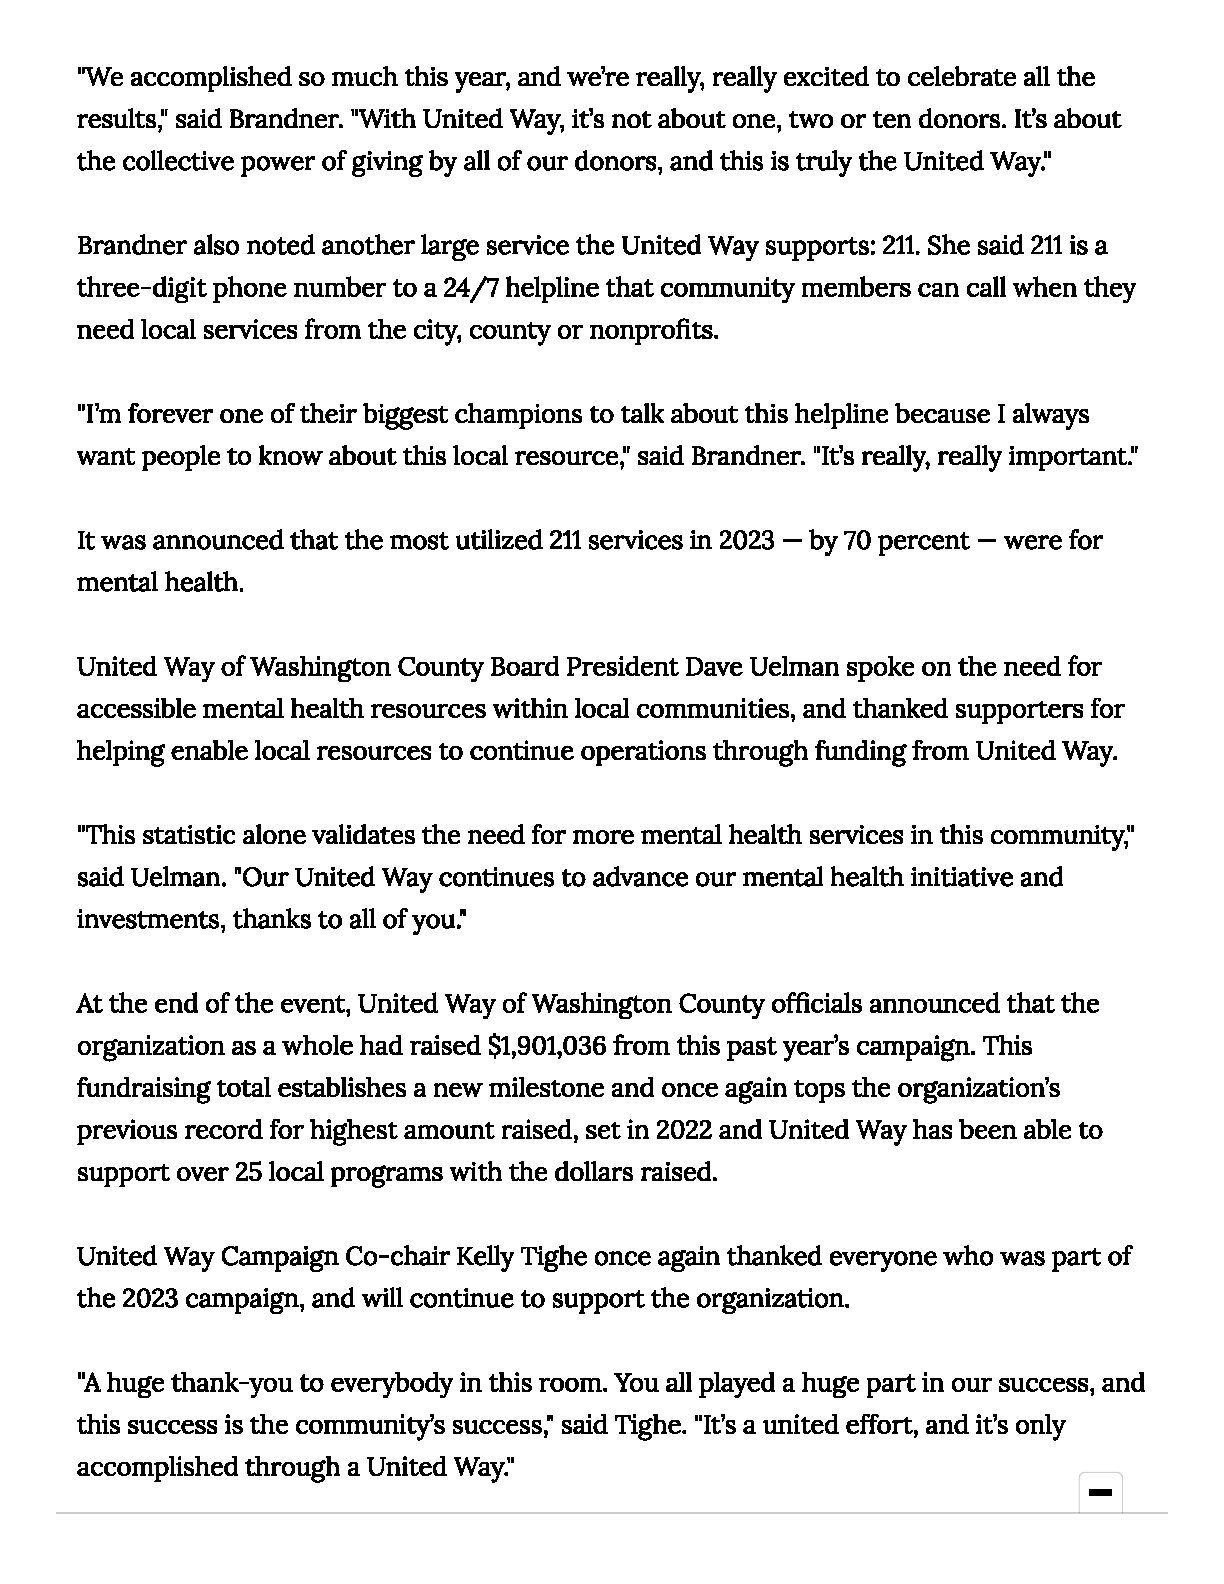 Page two of an article from the Daily News describing the 2023 United Way campaign success.